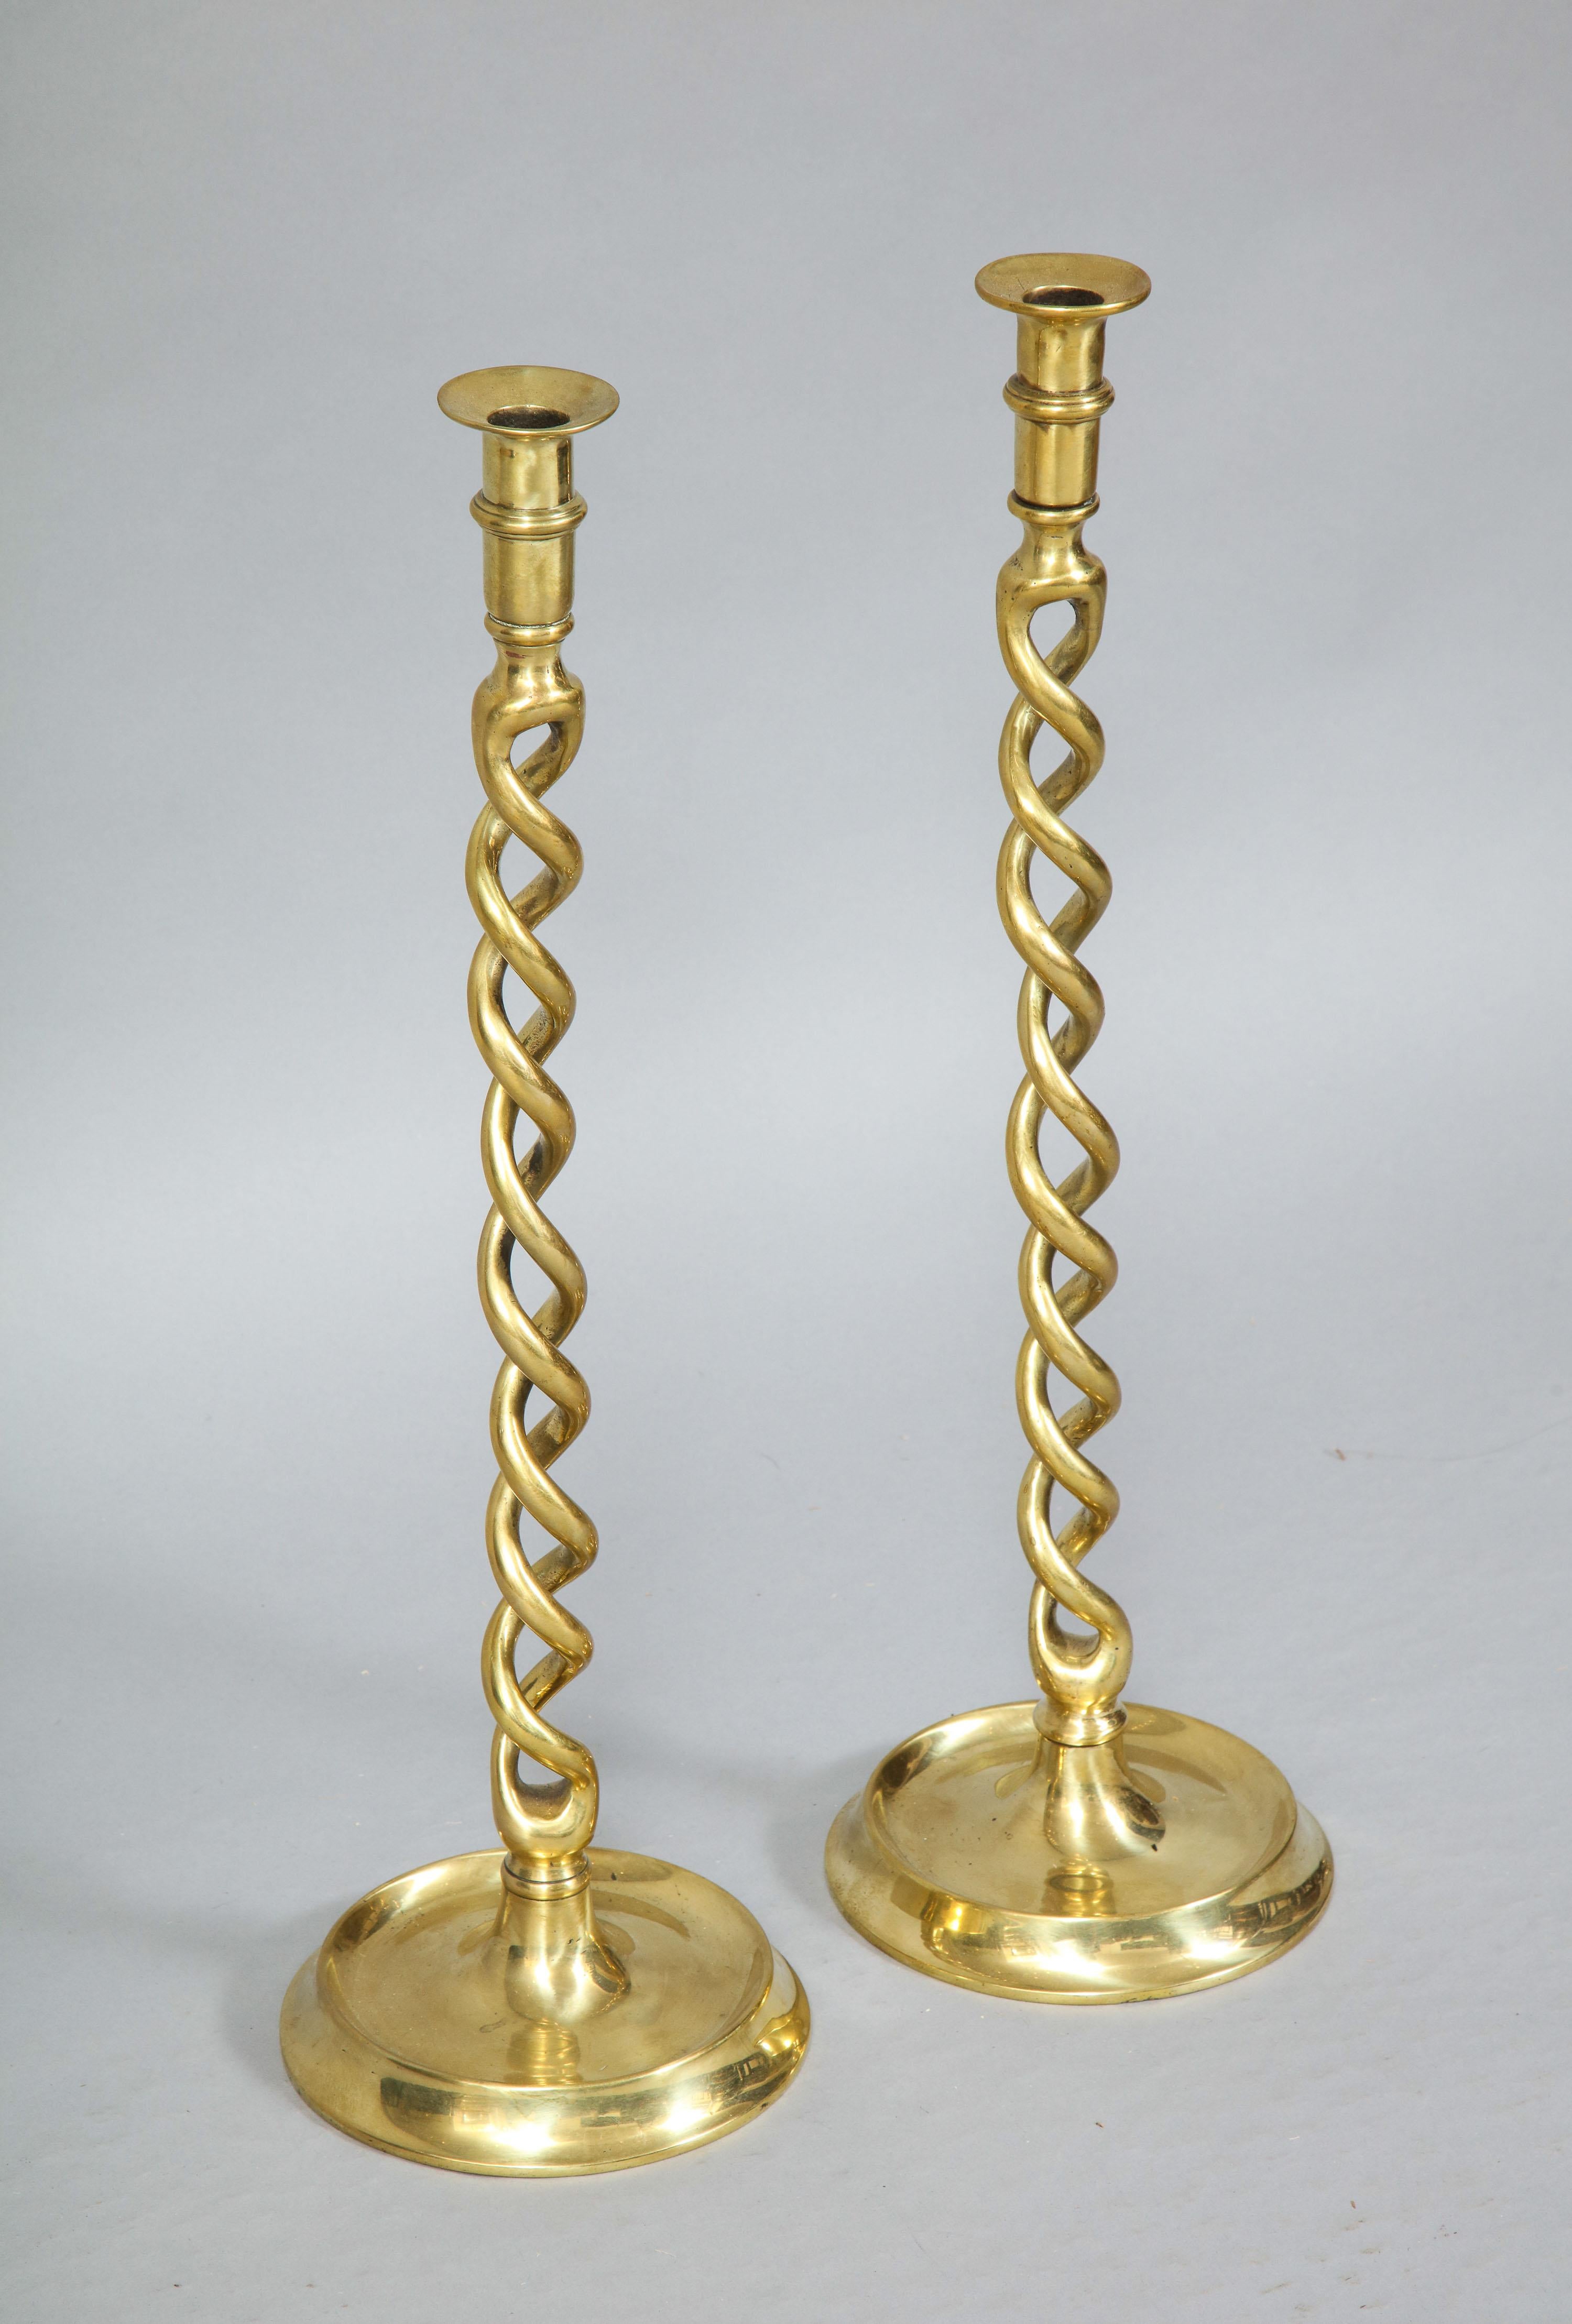 Fine pair of over scale Edwardian English brass candlesticks with barley twist design.